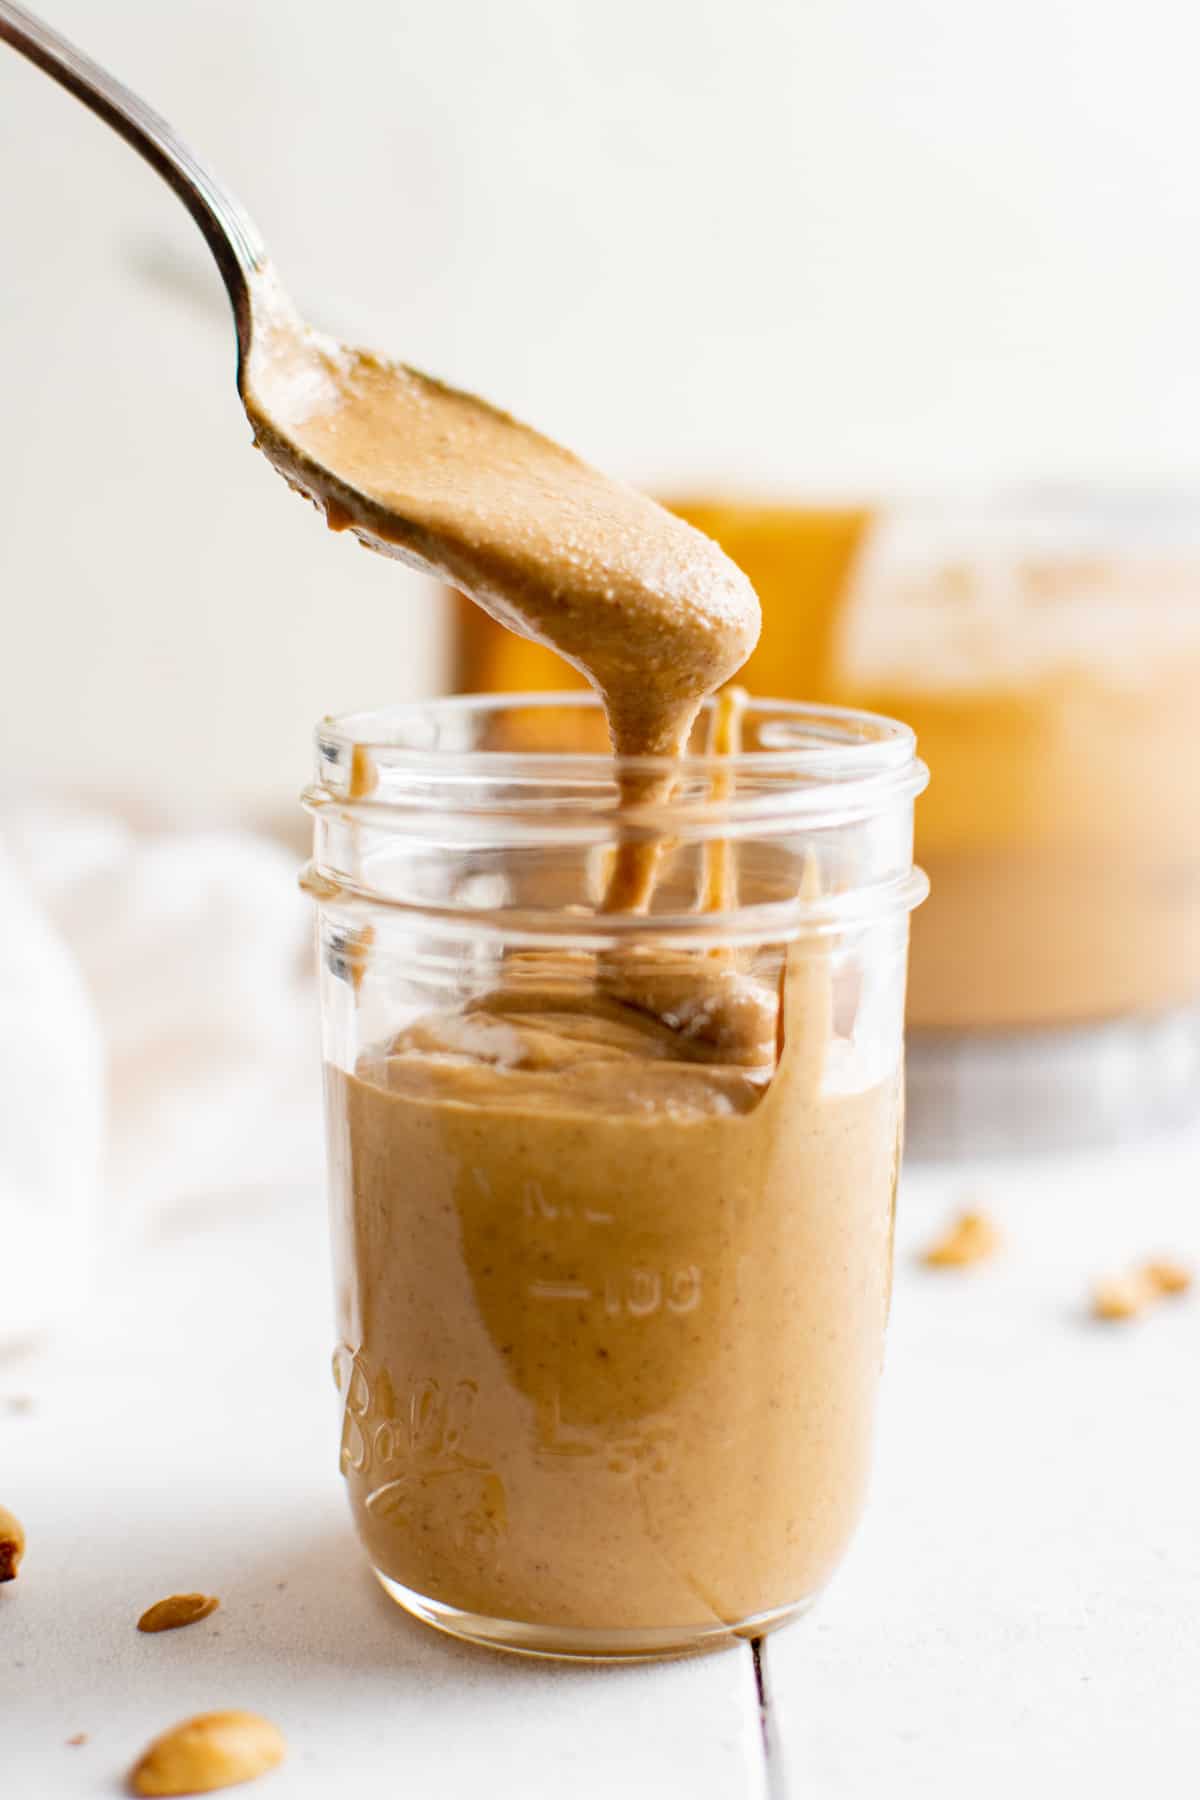 a spoon dipping into a jar of homemade peanut butter